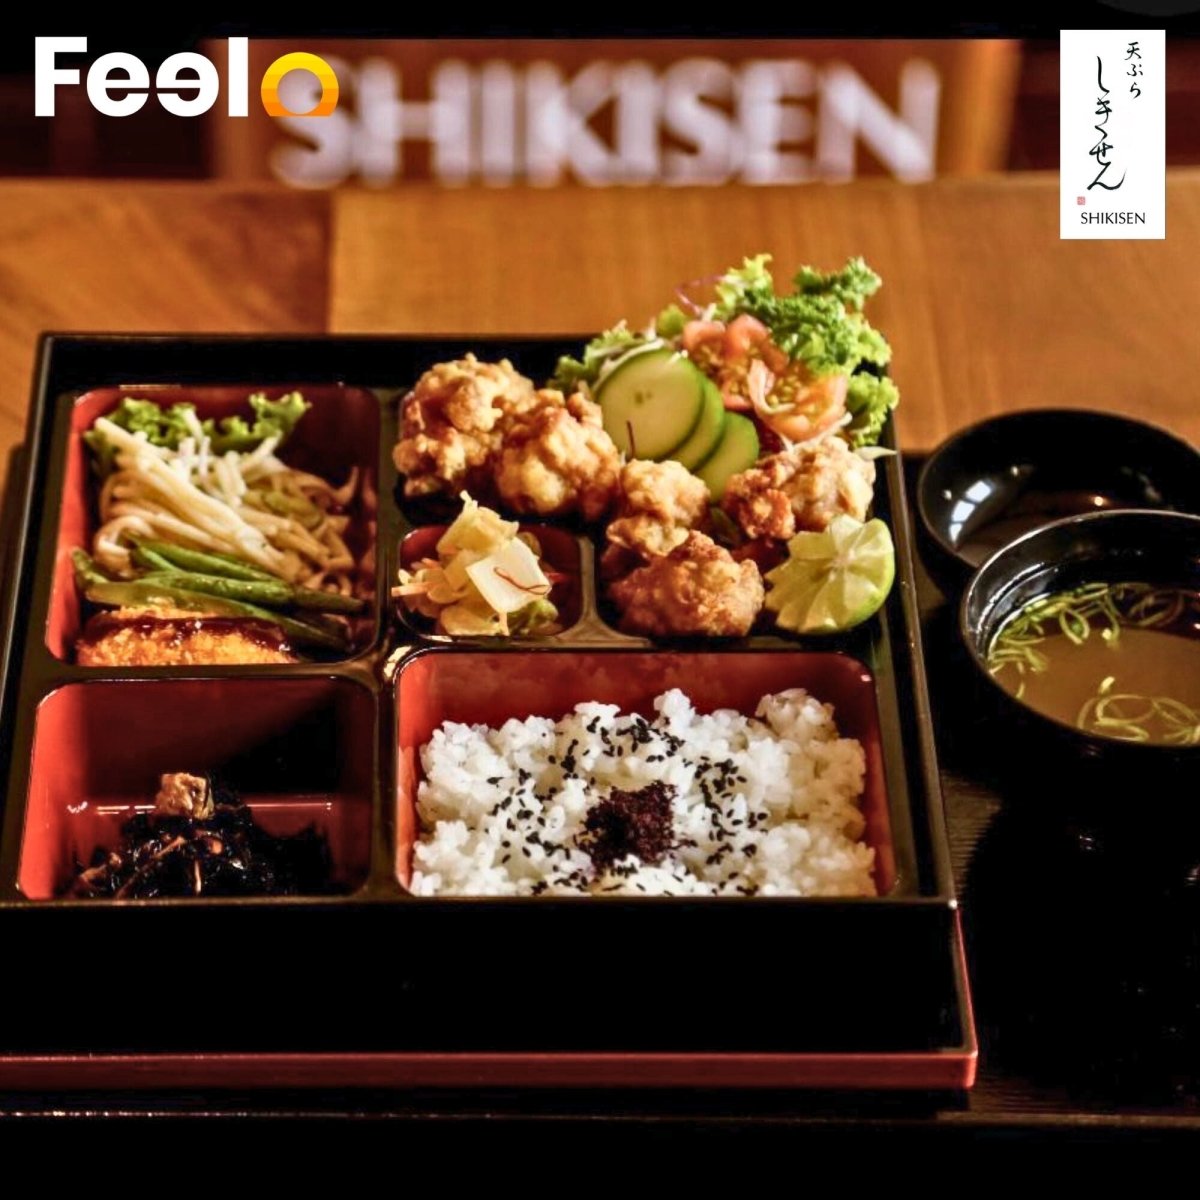 2 Authentic Japanese Bento Meals + 6 Pieces of Tuna Sushi for 2 People - Shikisen Japanese Restaurant, Colombo 03 | Feelo